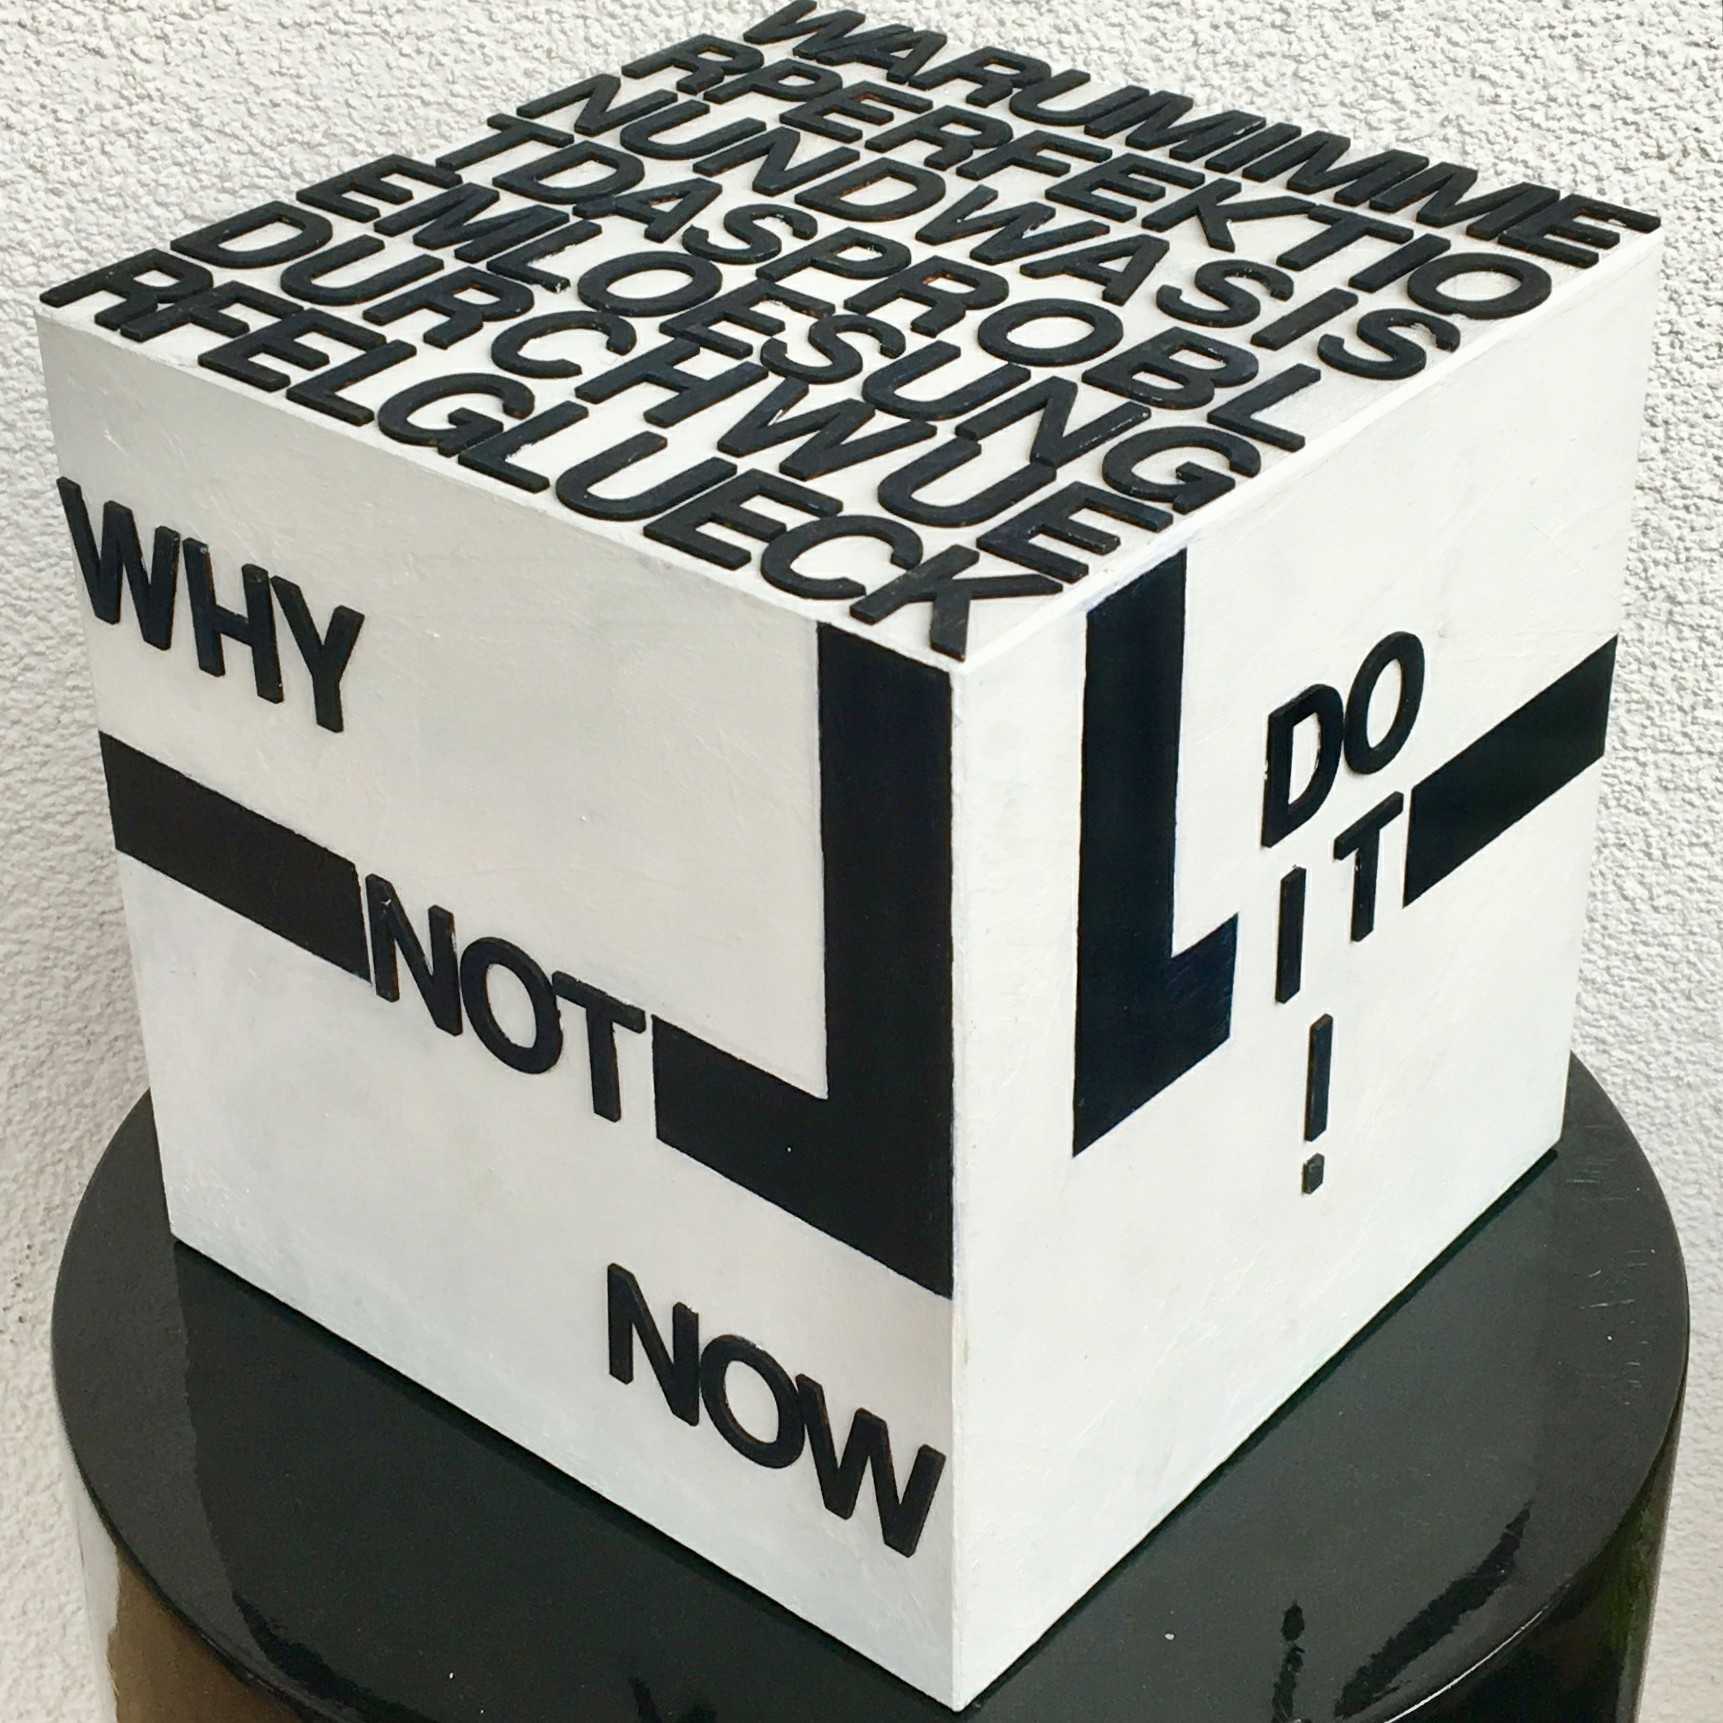 Why not now, 20x20x20, 2018